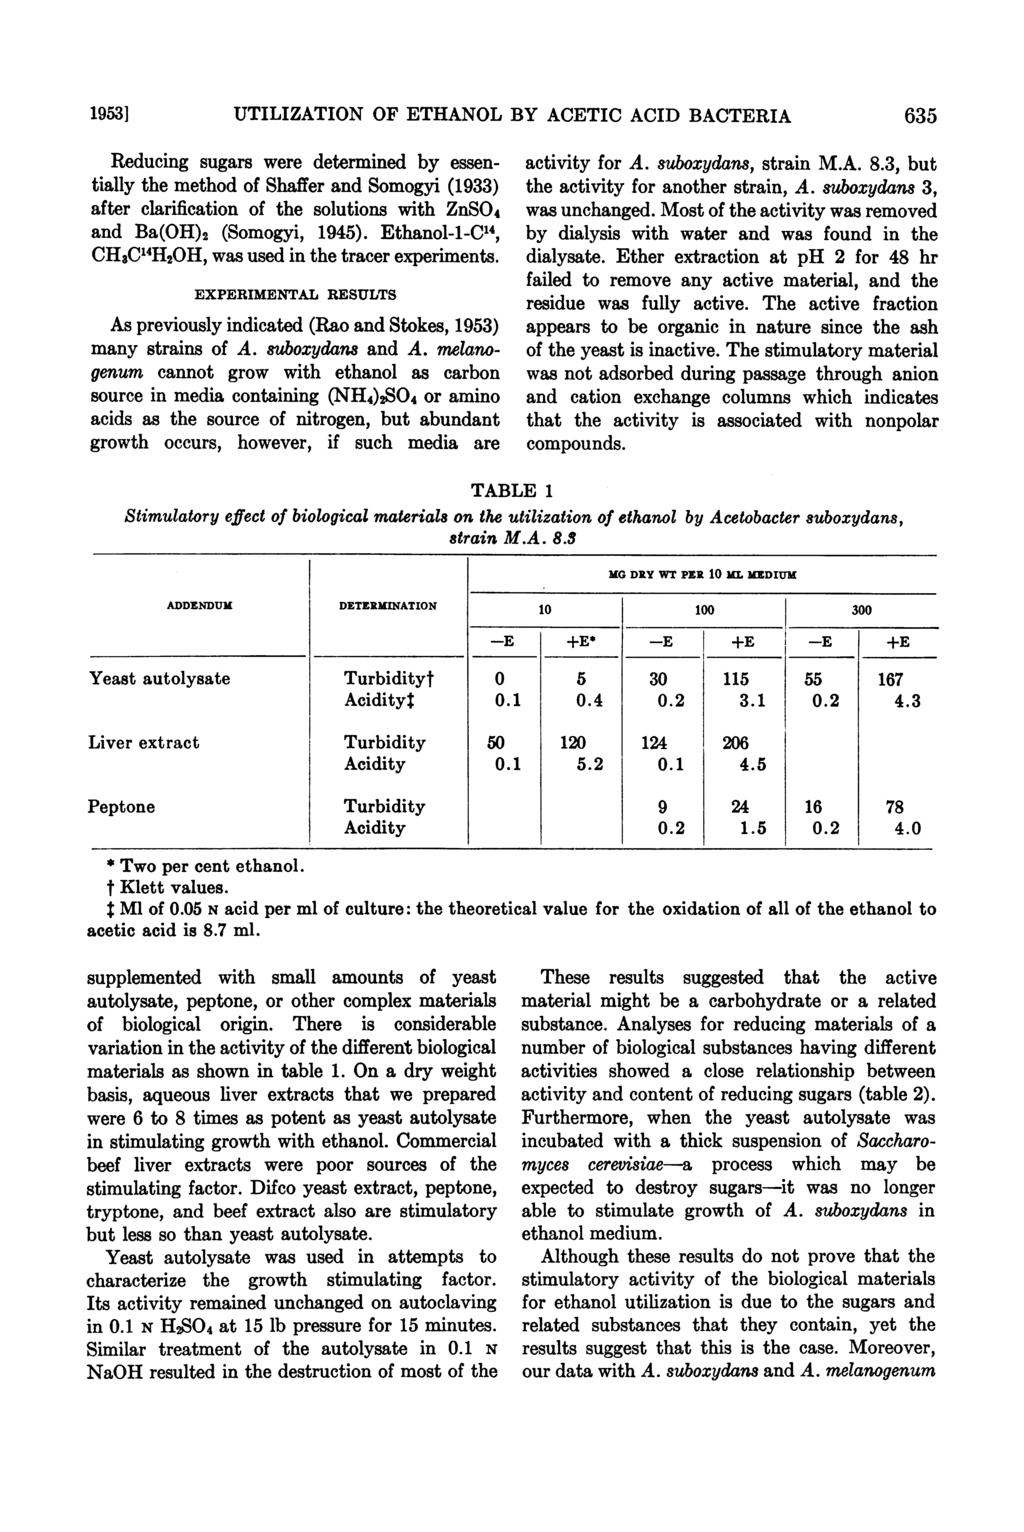 19531 UTILIZATION OF ETHANOL BY ACETIC ACID BACTERIA 635 Reducing sugars were determined by essentially the method of Shaffer and Somogyi (1933) after clarification of the solutions with ZnSO4 and